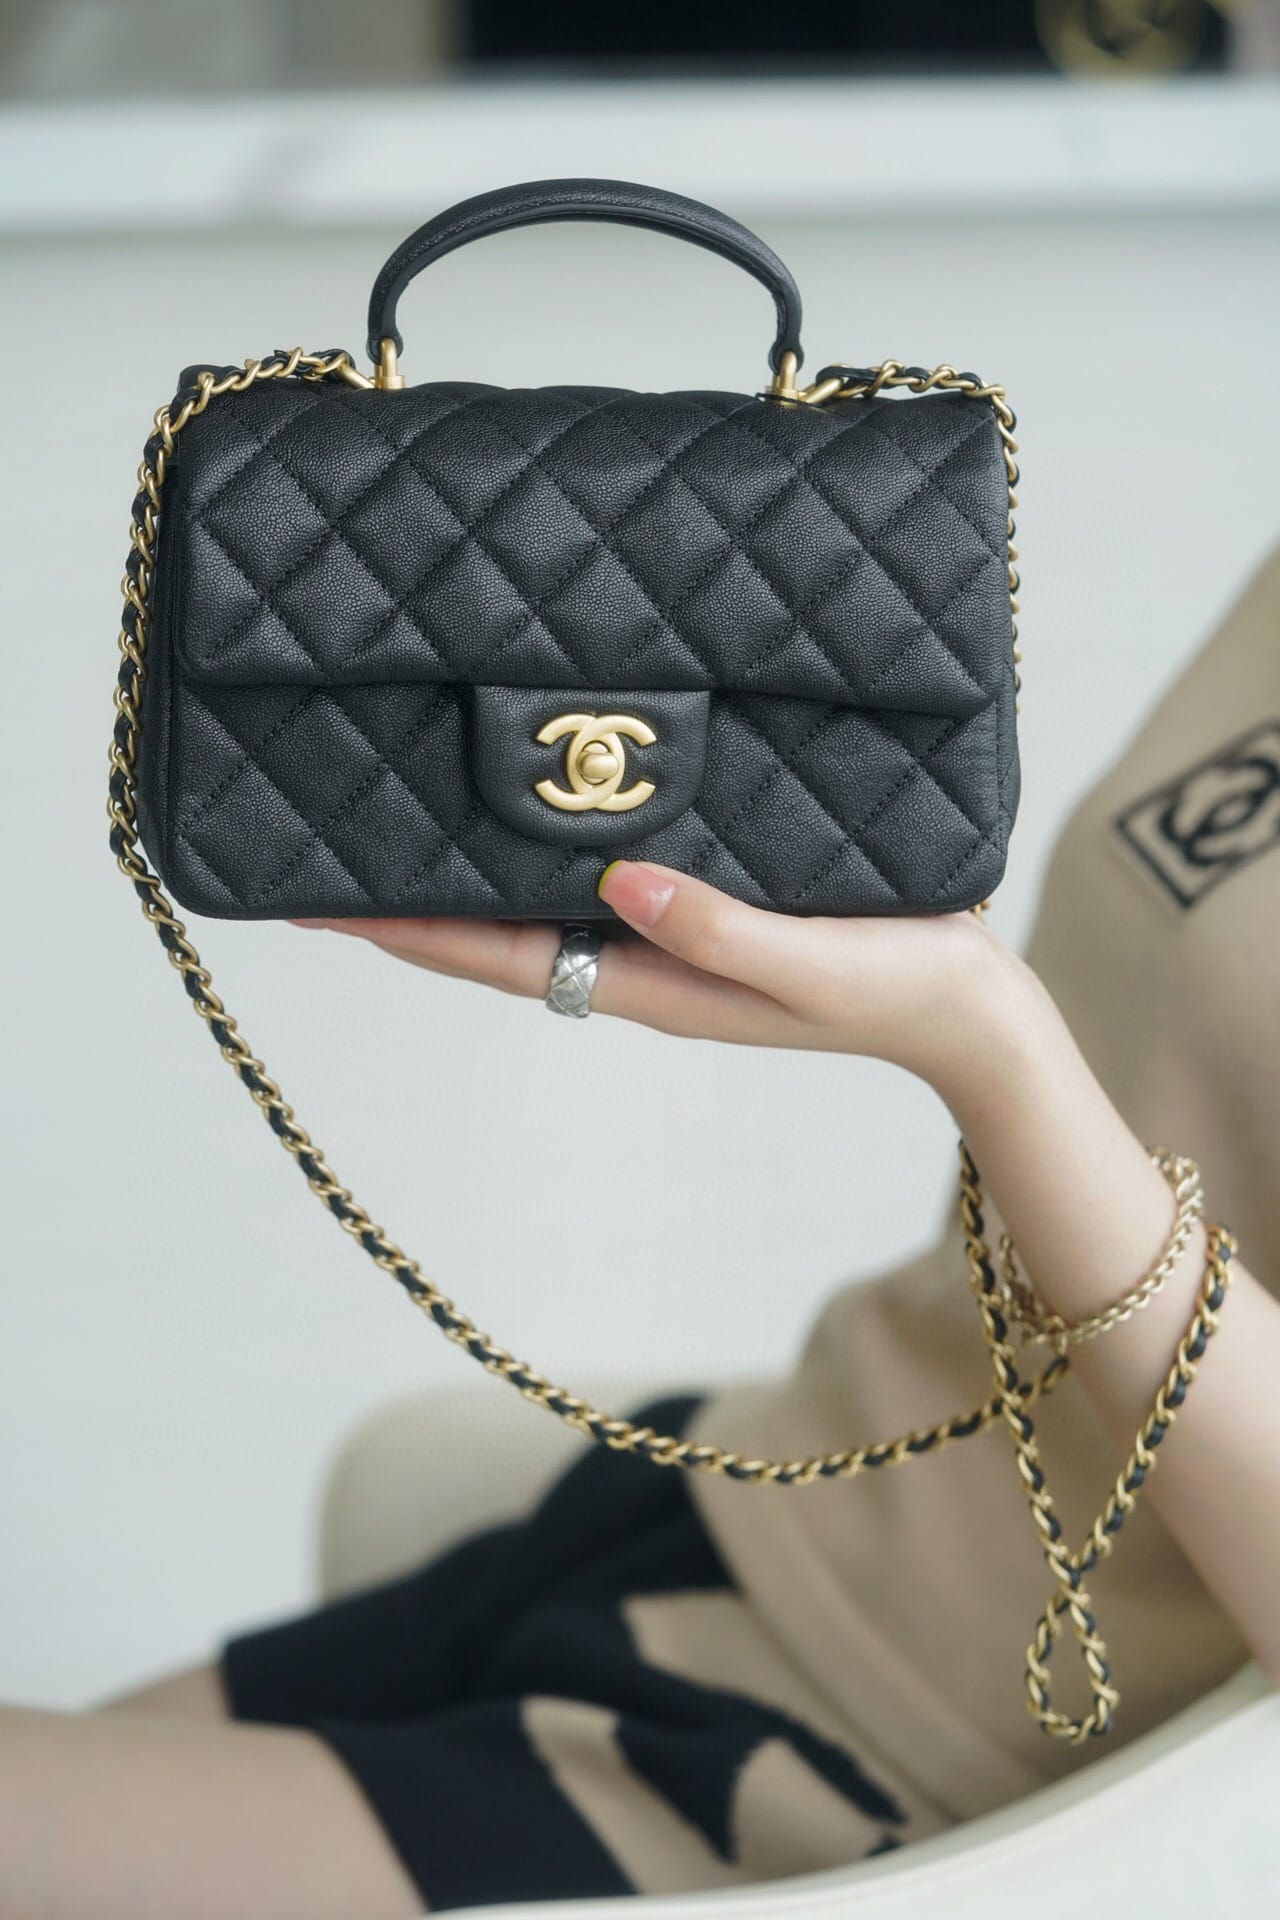 Chanel Black Quilted Caviar Small Coco Top Handle Flap Bag Gold Hardware, 2020 (Like New)